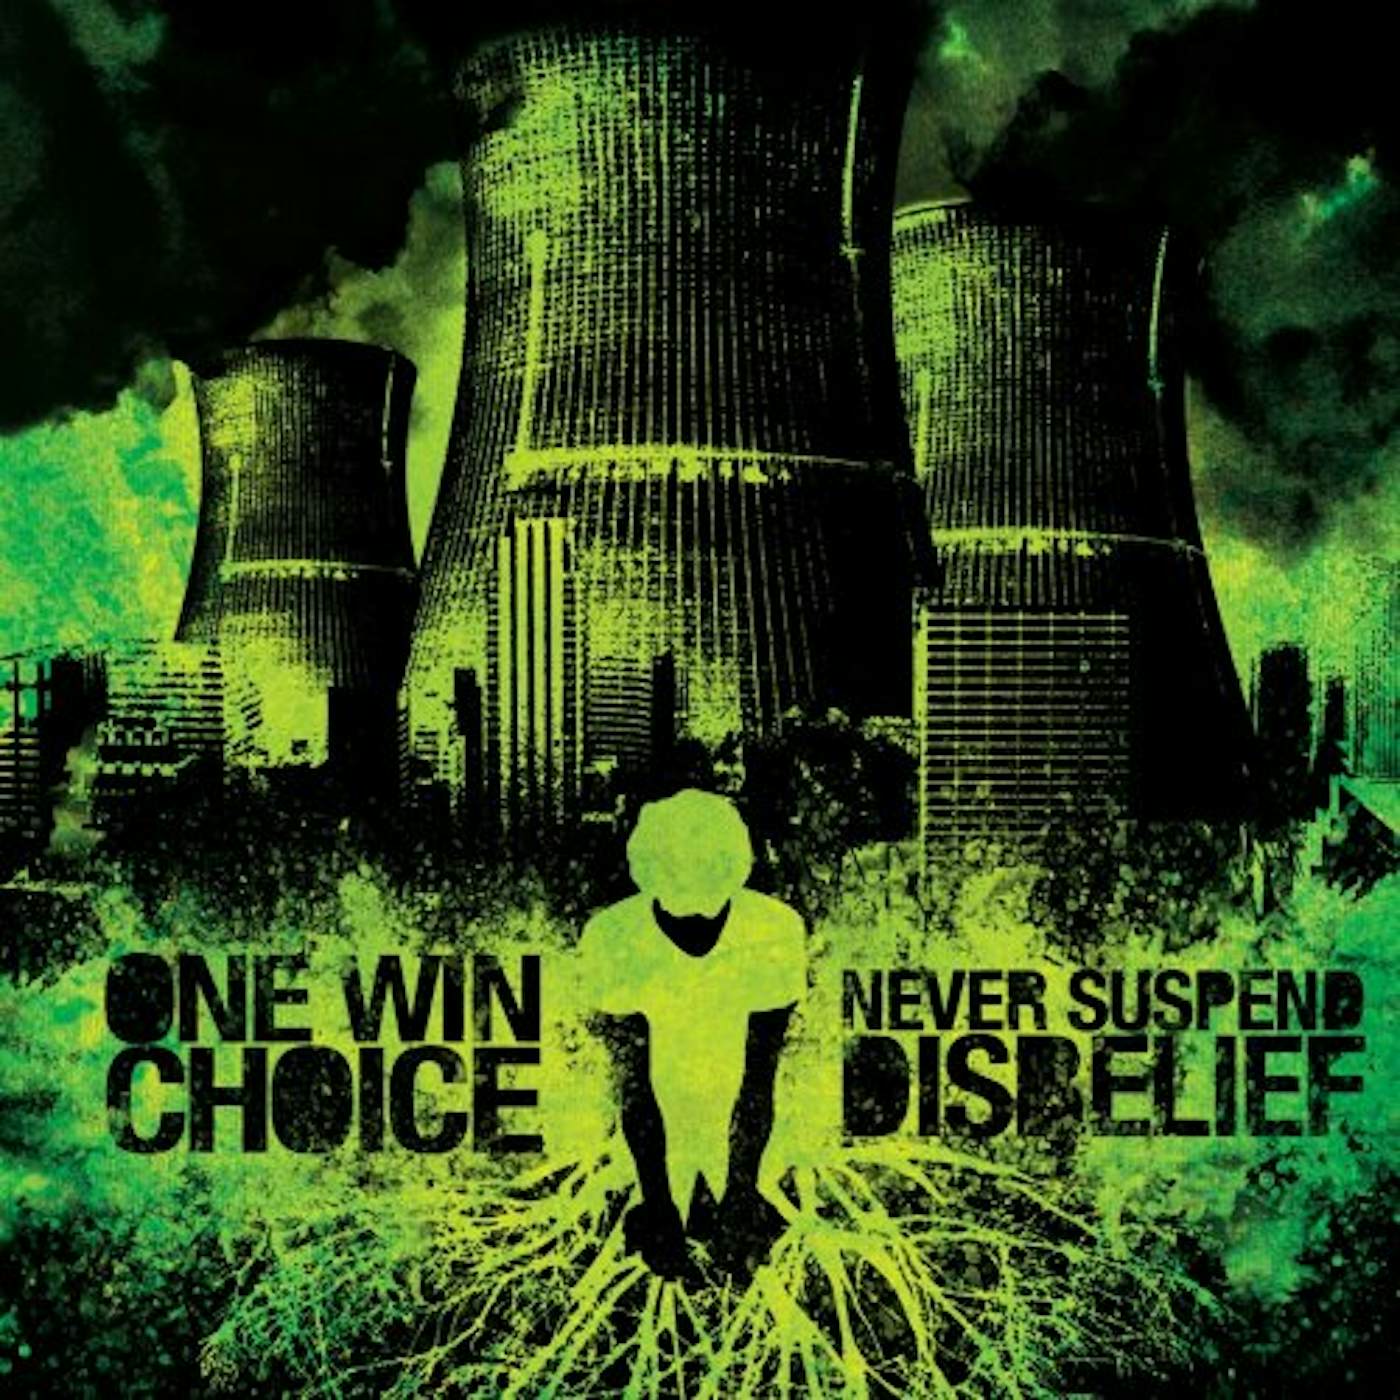 One Win Choice NEVER SUSPEND DISBELIEF CD